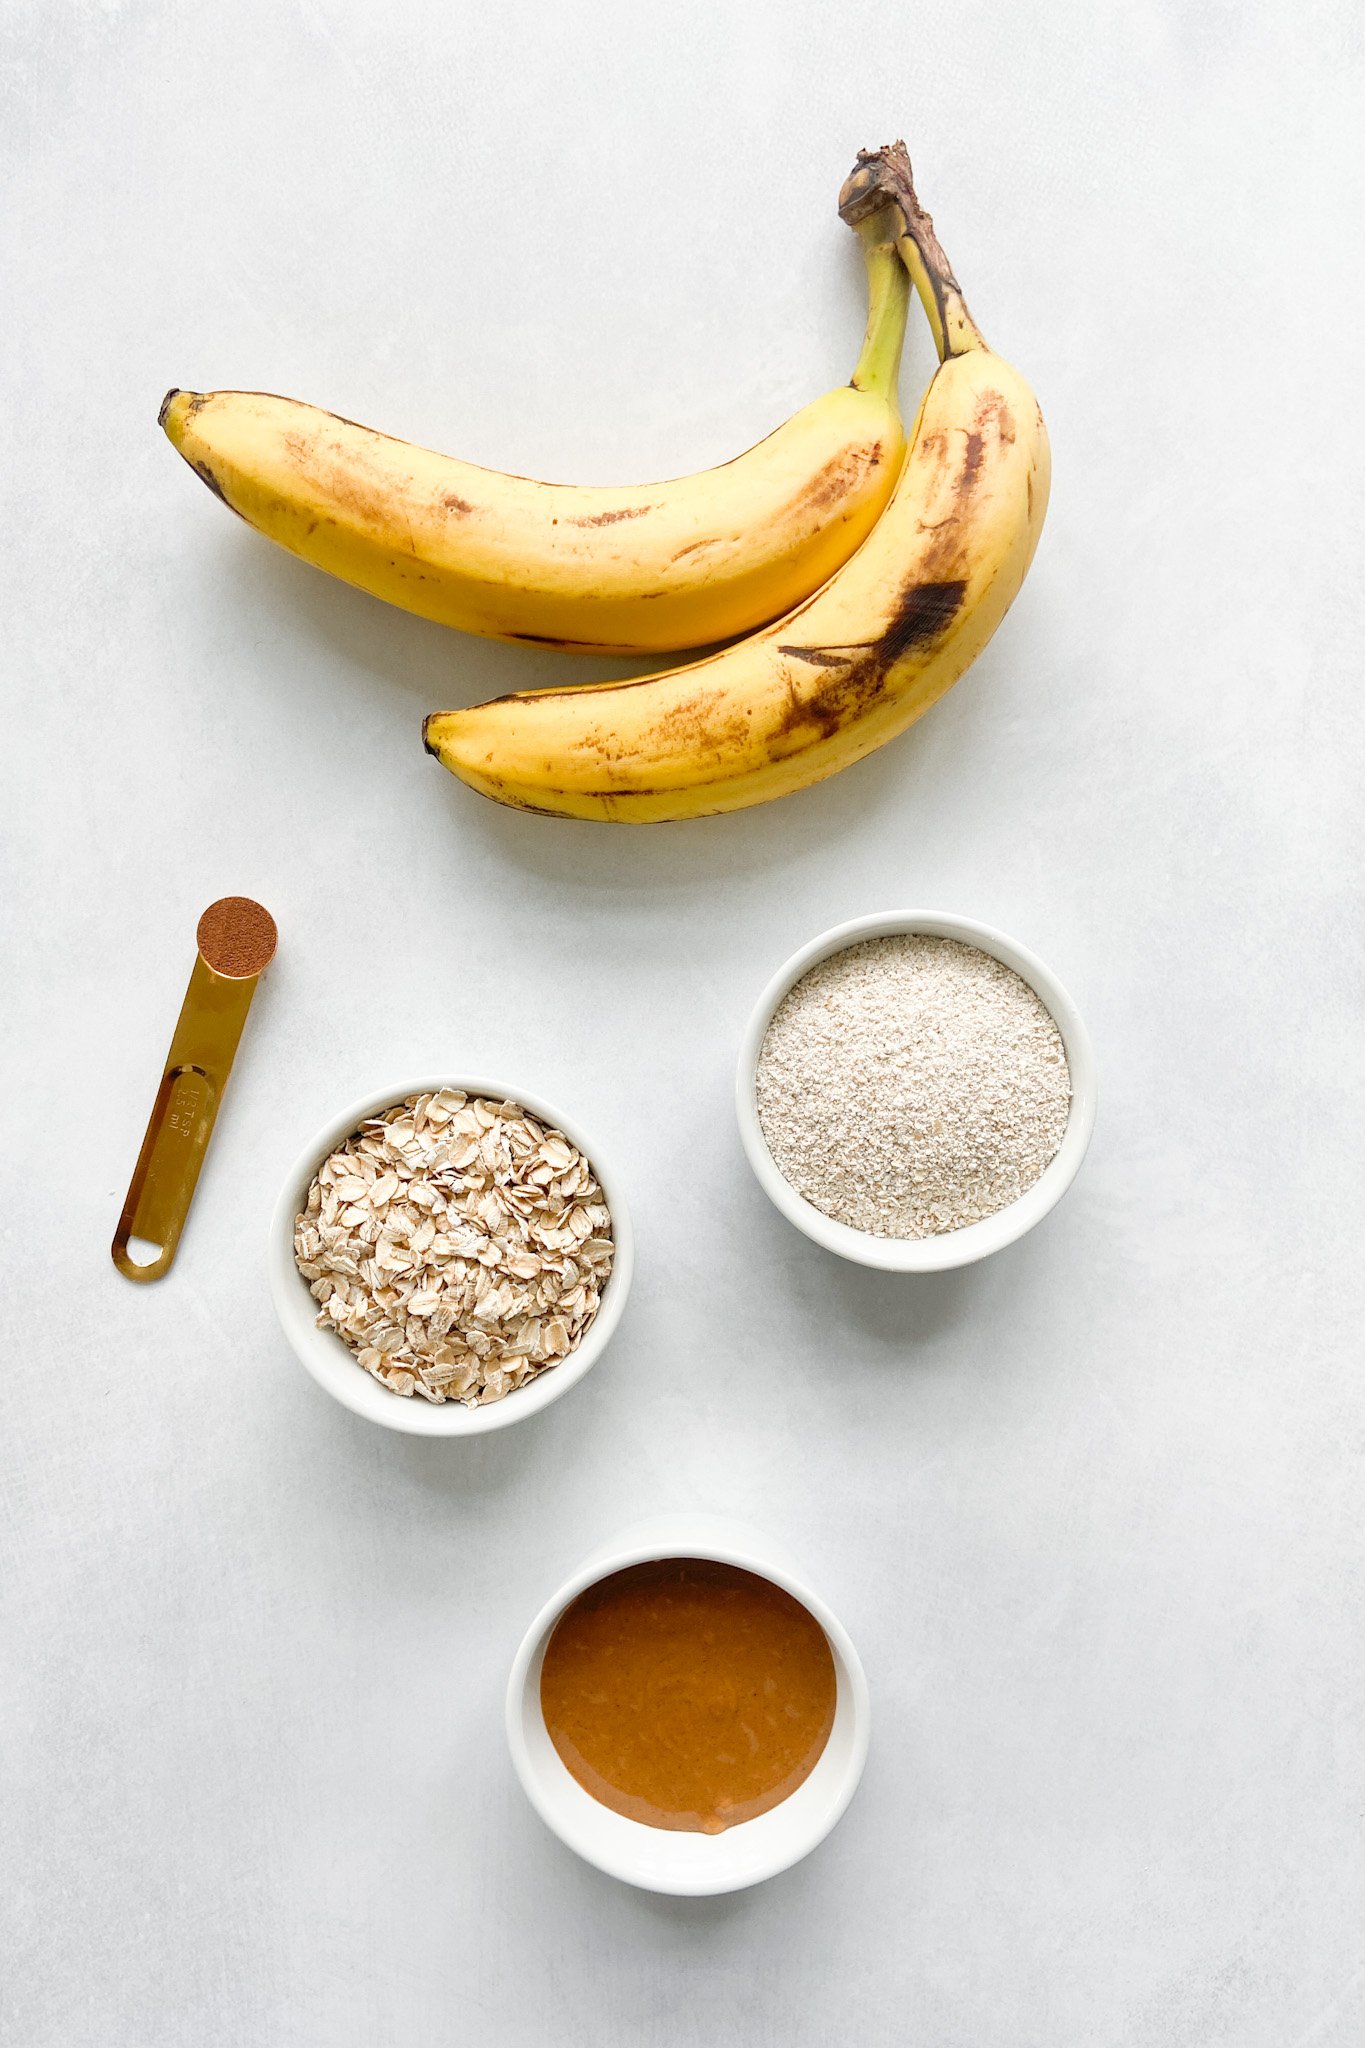 Ingredients to make peanut butter and banana cookies. See recipe card for detailed ingredient quantities.